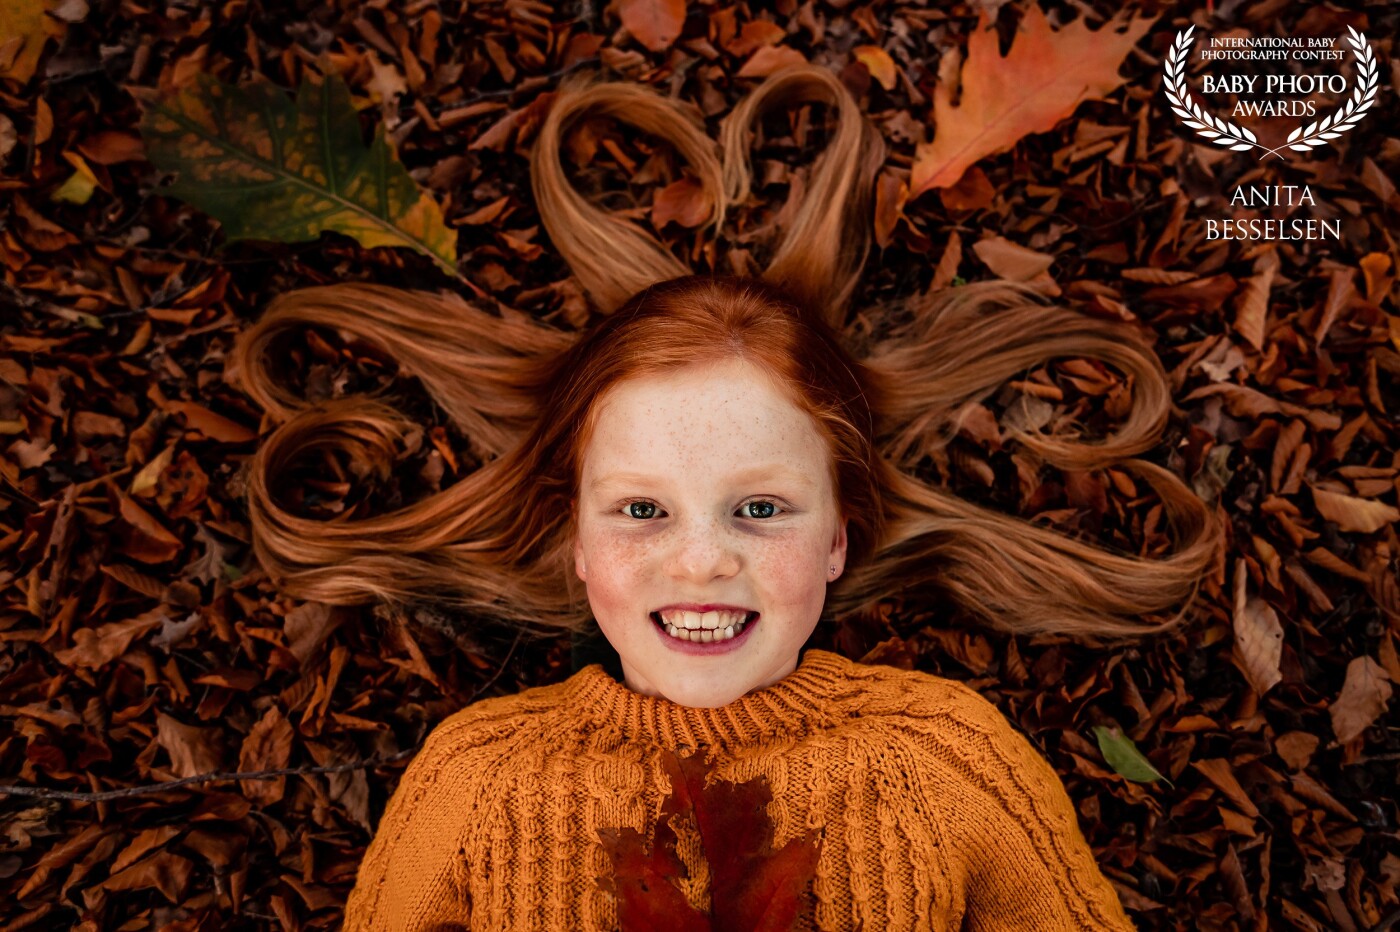 Last fall I went to the forest for a photoshoot with this pretty girl. So amazing how her hair matched perfectly with the leaves. Her beautiful red hair in combination with those stunning blue eyes!